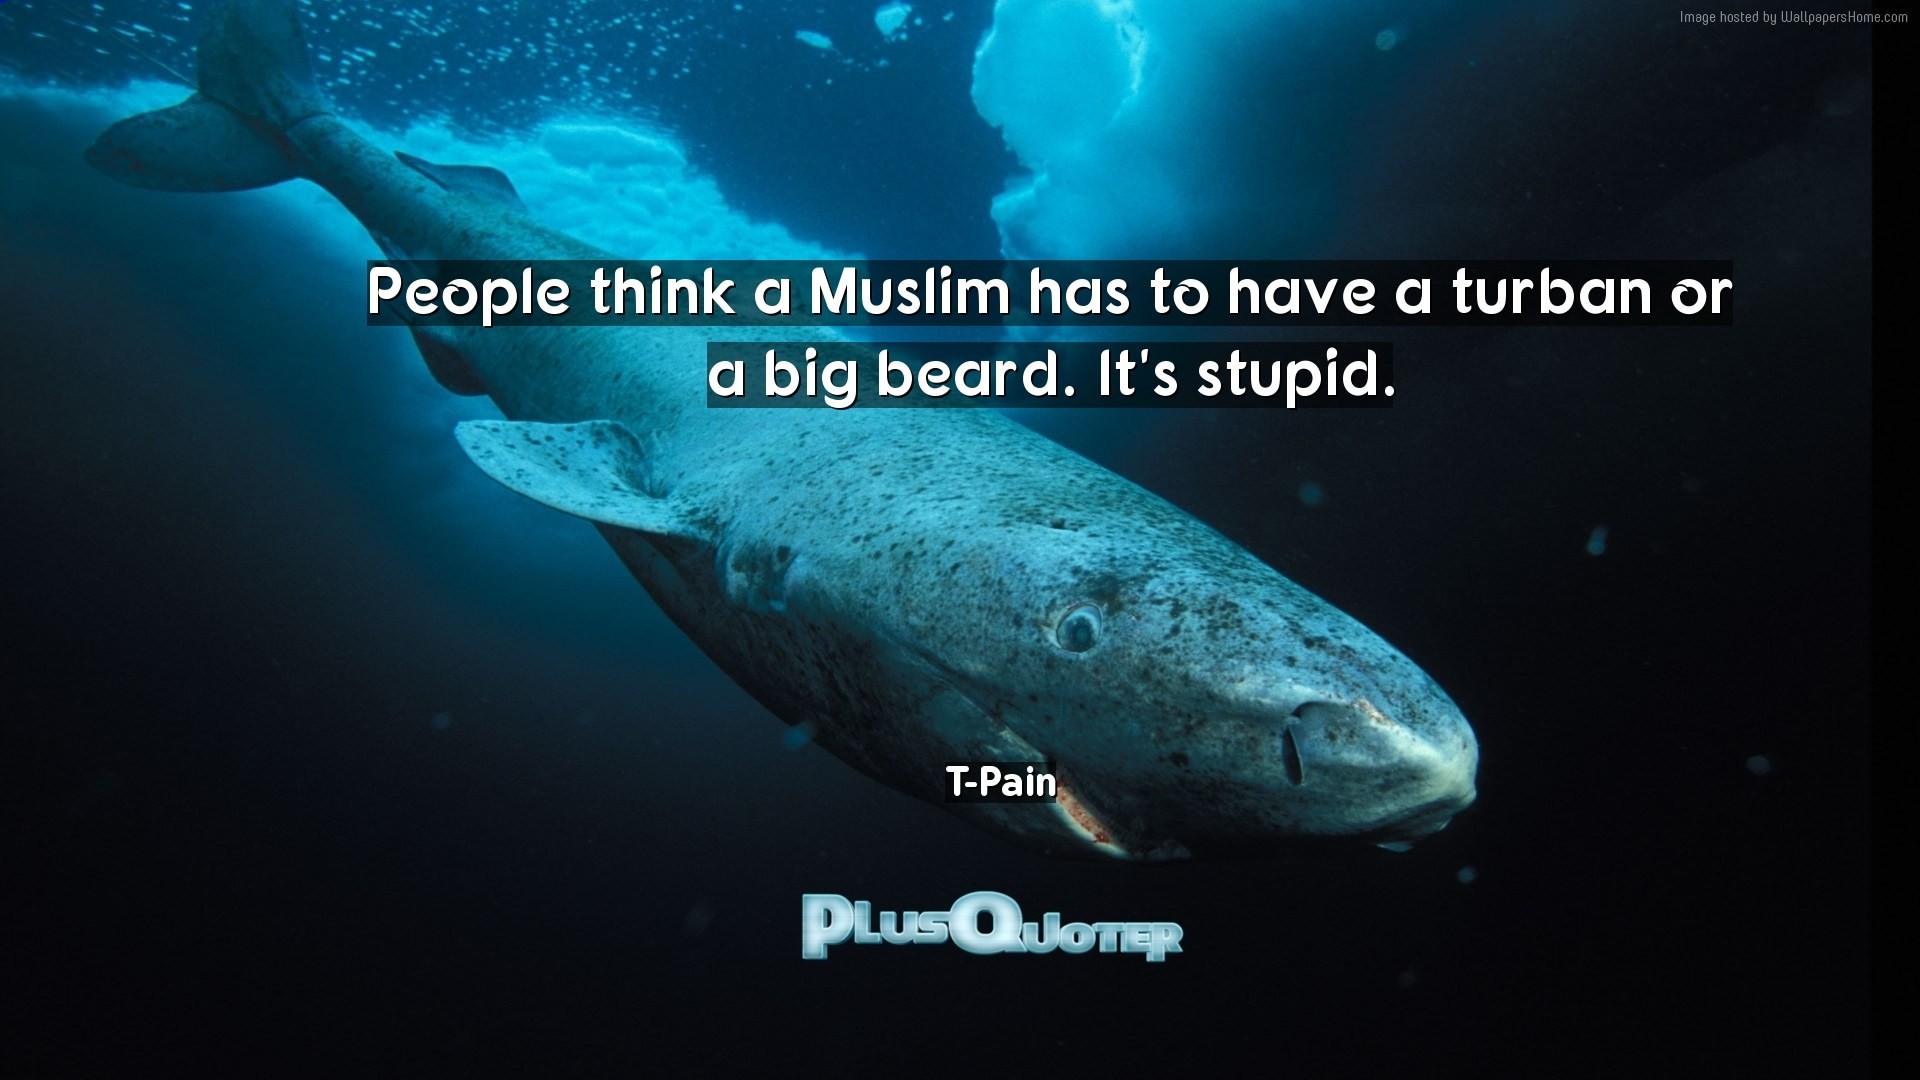 1920x1080 Download Wallpaper with inspirational Quotes- "People think a Muslim has to  have a turban